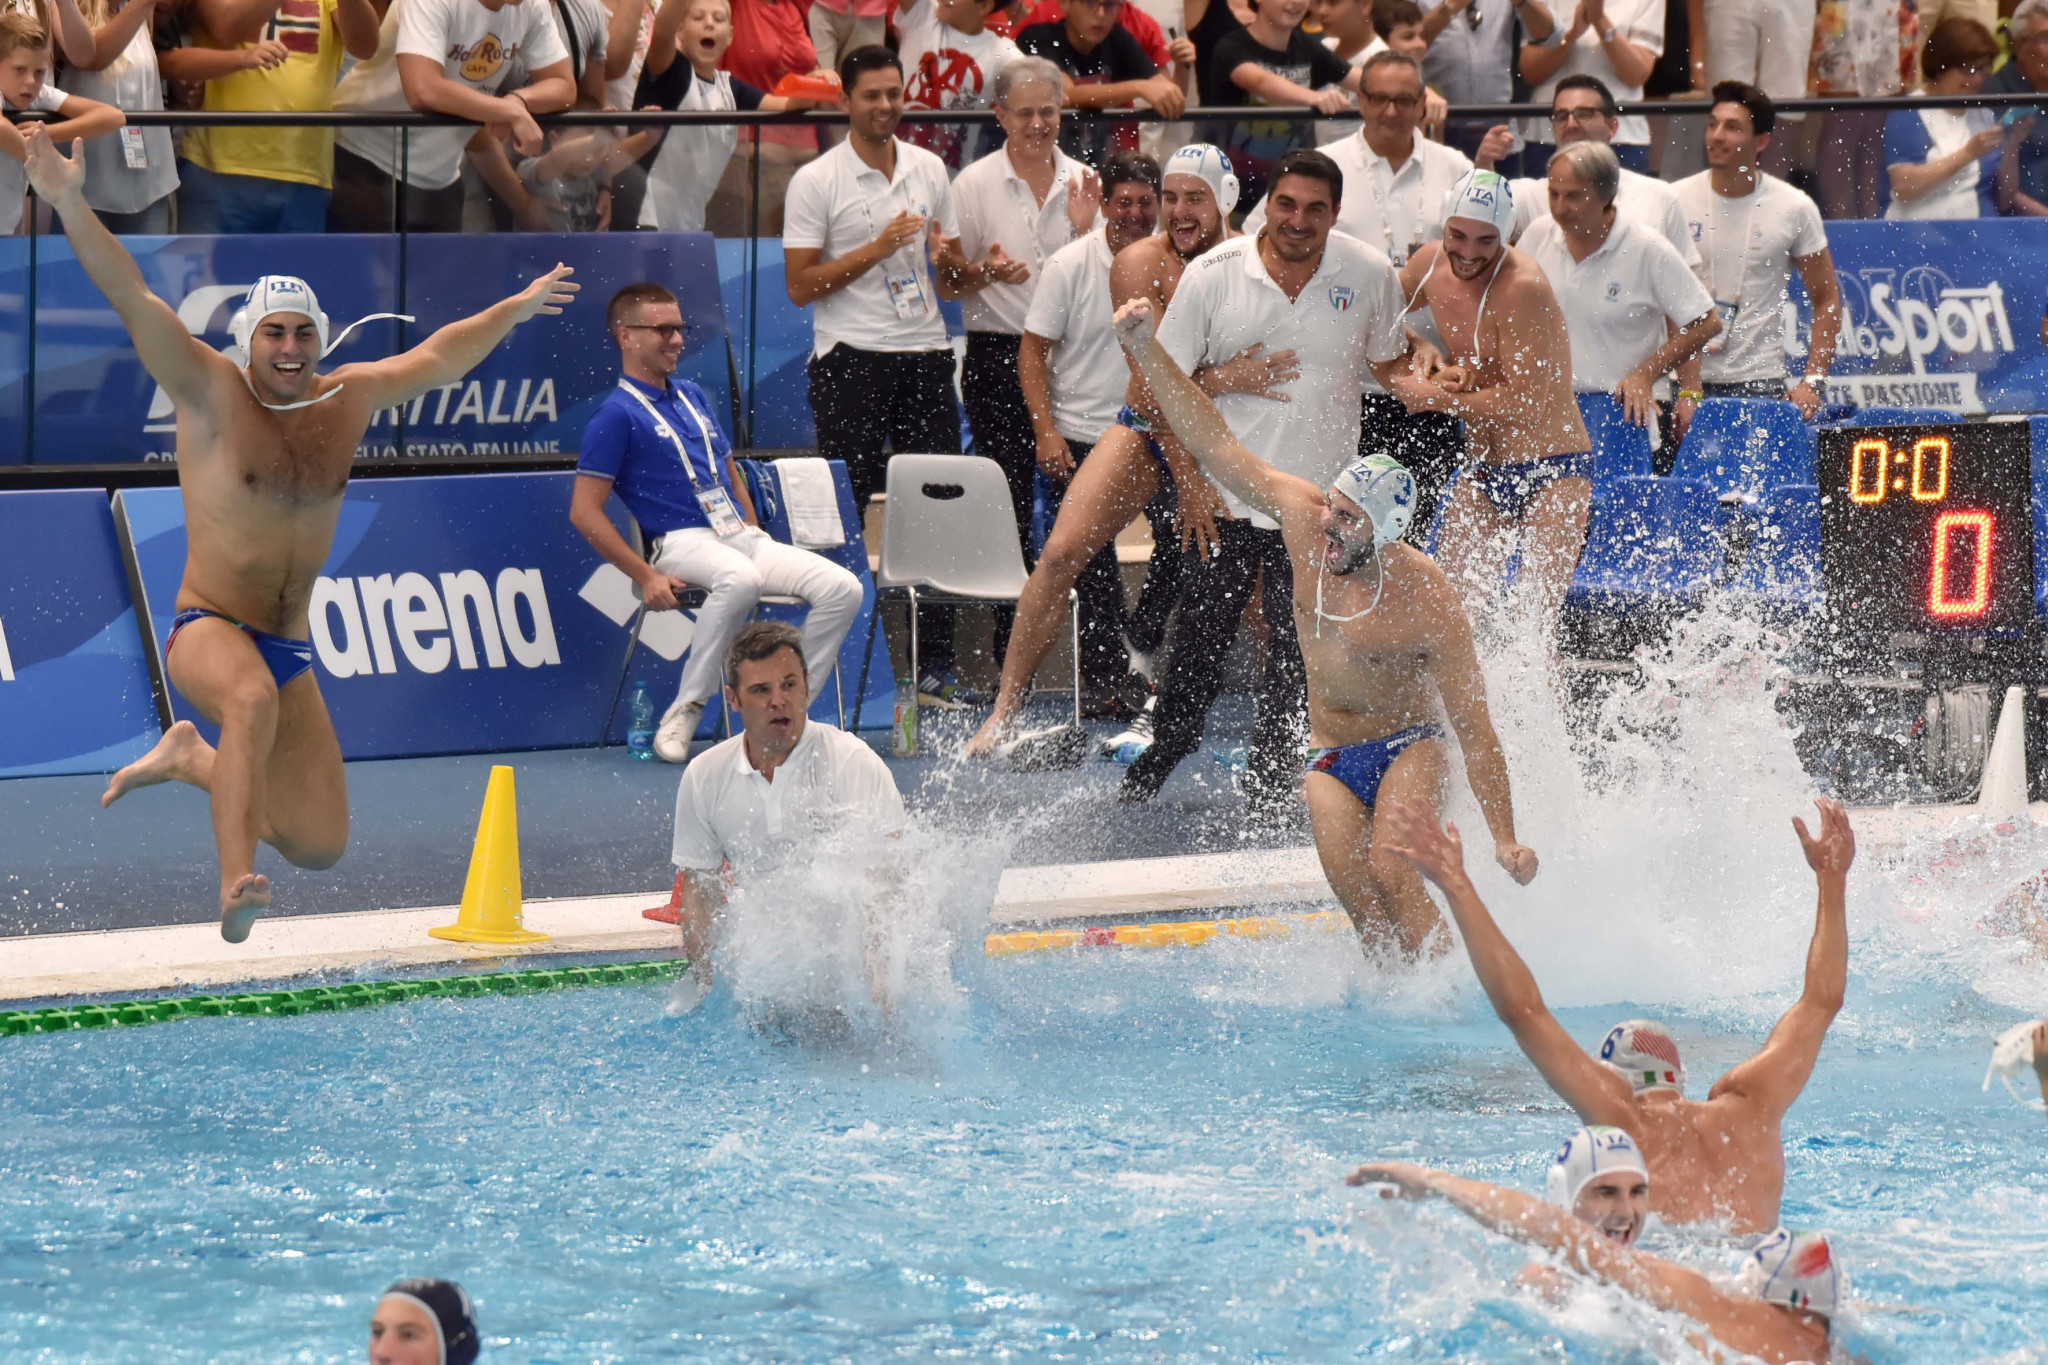 The Italian team celebrated in front of a sold-out crowd at the Piscina Scandone ©Naples 2019